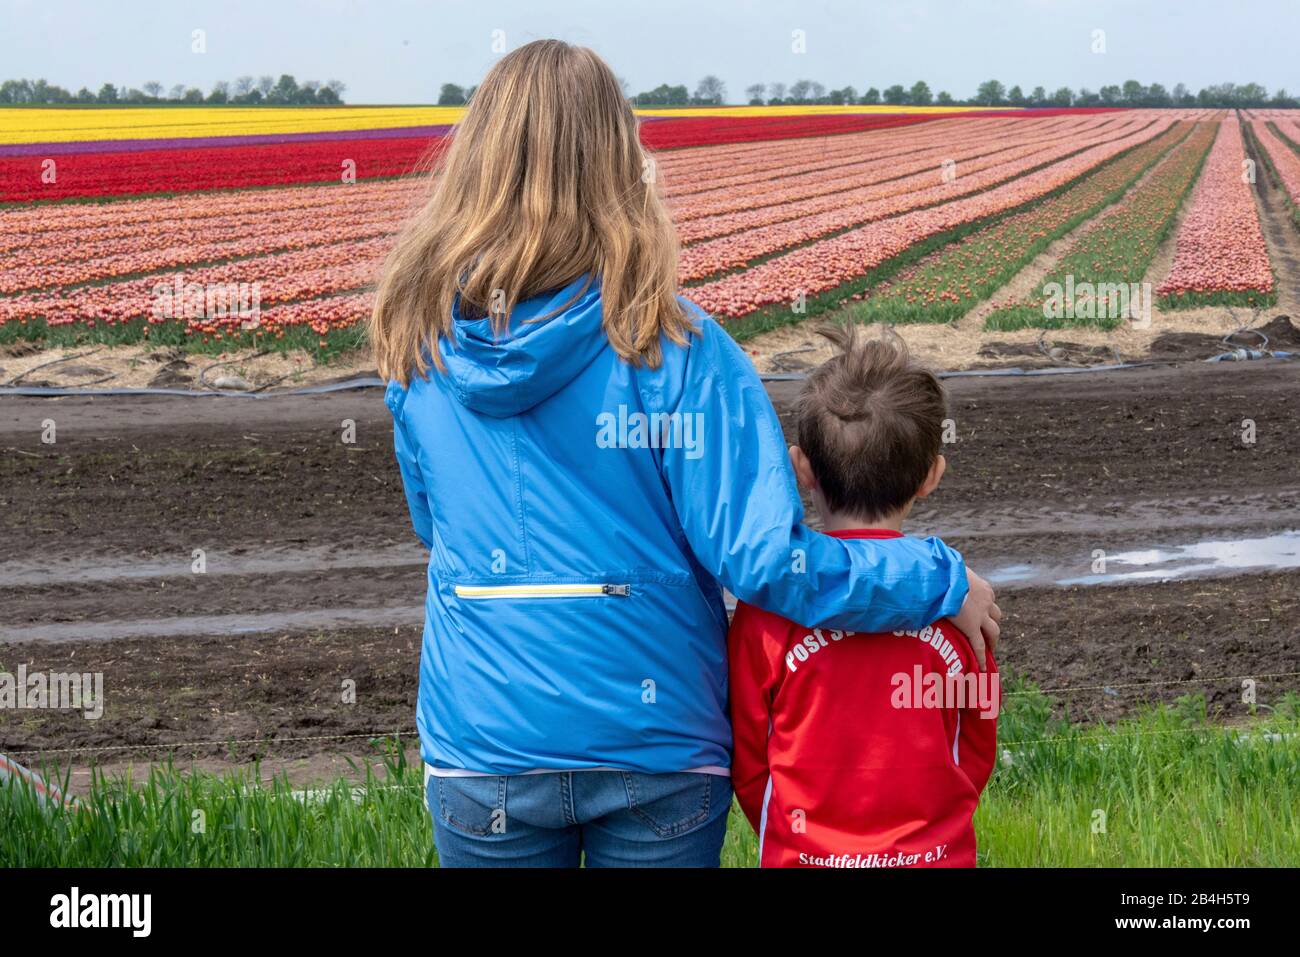 A girl and a boy look at a tulip field reaching to the horizon, Stock Photo